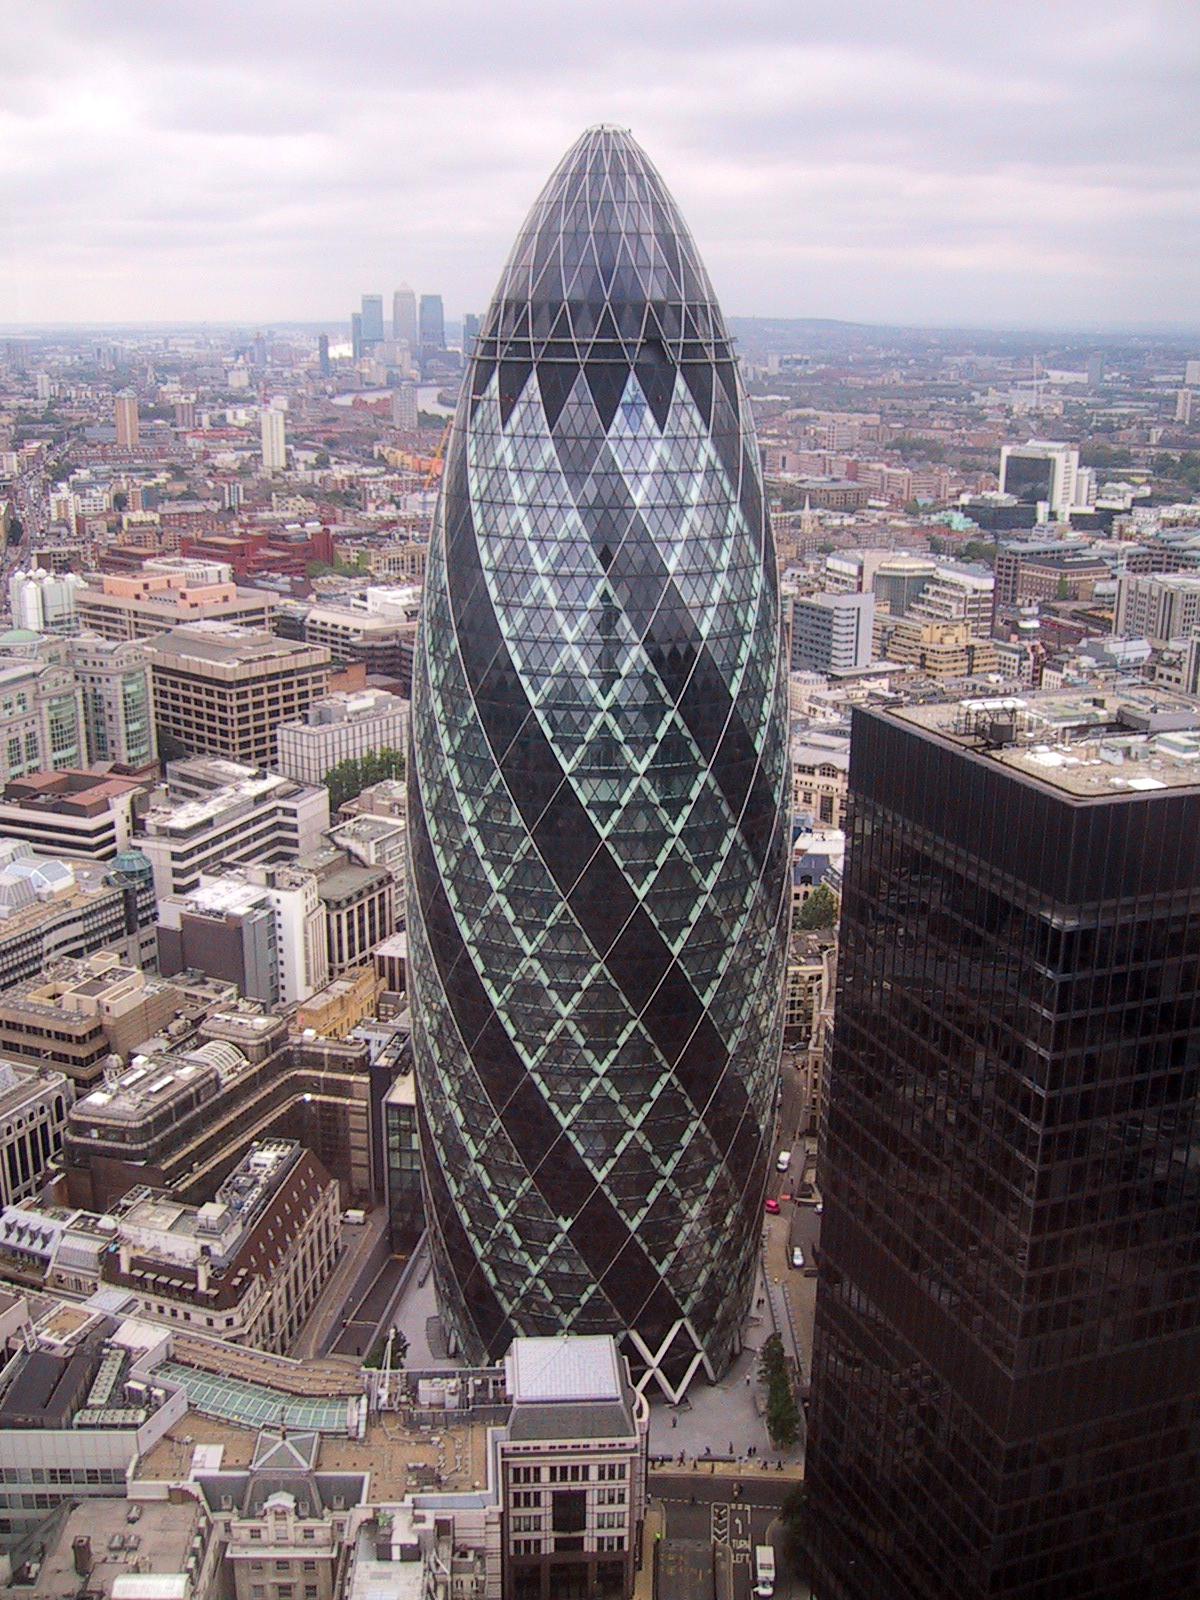 the London Ghurkin - 30 St Mary Axe, Gherkin. By Paste at Wikipedia Licensed under Public domain https://en.wikipedia.org/wiki/File:30_St_Mary_Axe,_'Gherkin'.JPG#/media/File:30_St_Mary_Axe,_%27Gherkin%27.JPG